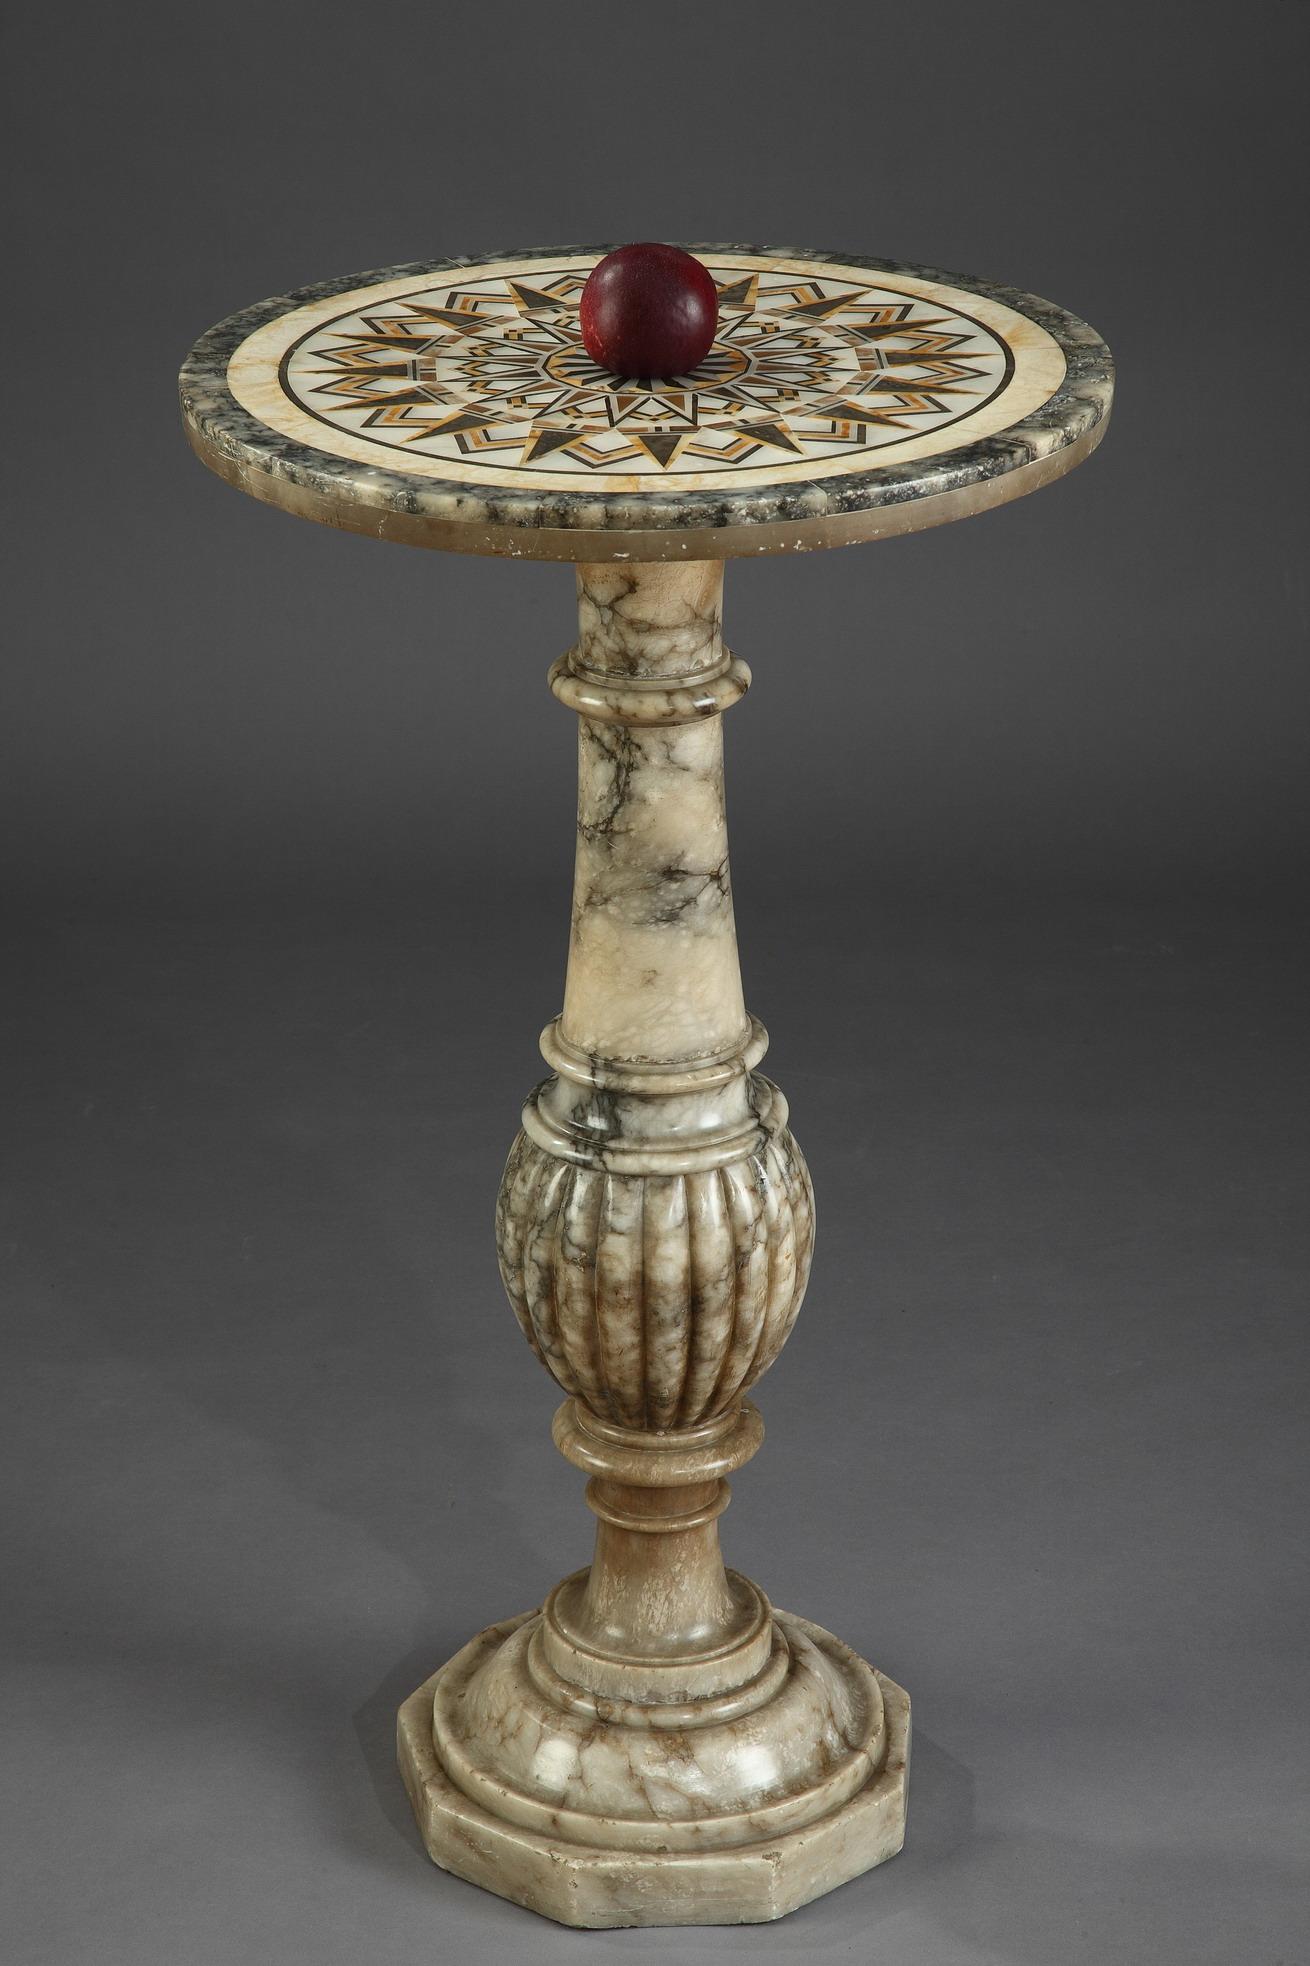 Italian pedestal table in alabaster, with a circular top in marquetry of several varieties of marble with a radiating pattern, in gray, ochre and white tones. This tray is inspired by a type of decoration of the sixteenth century, in which the